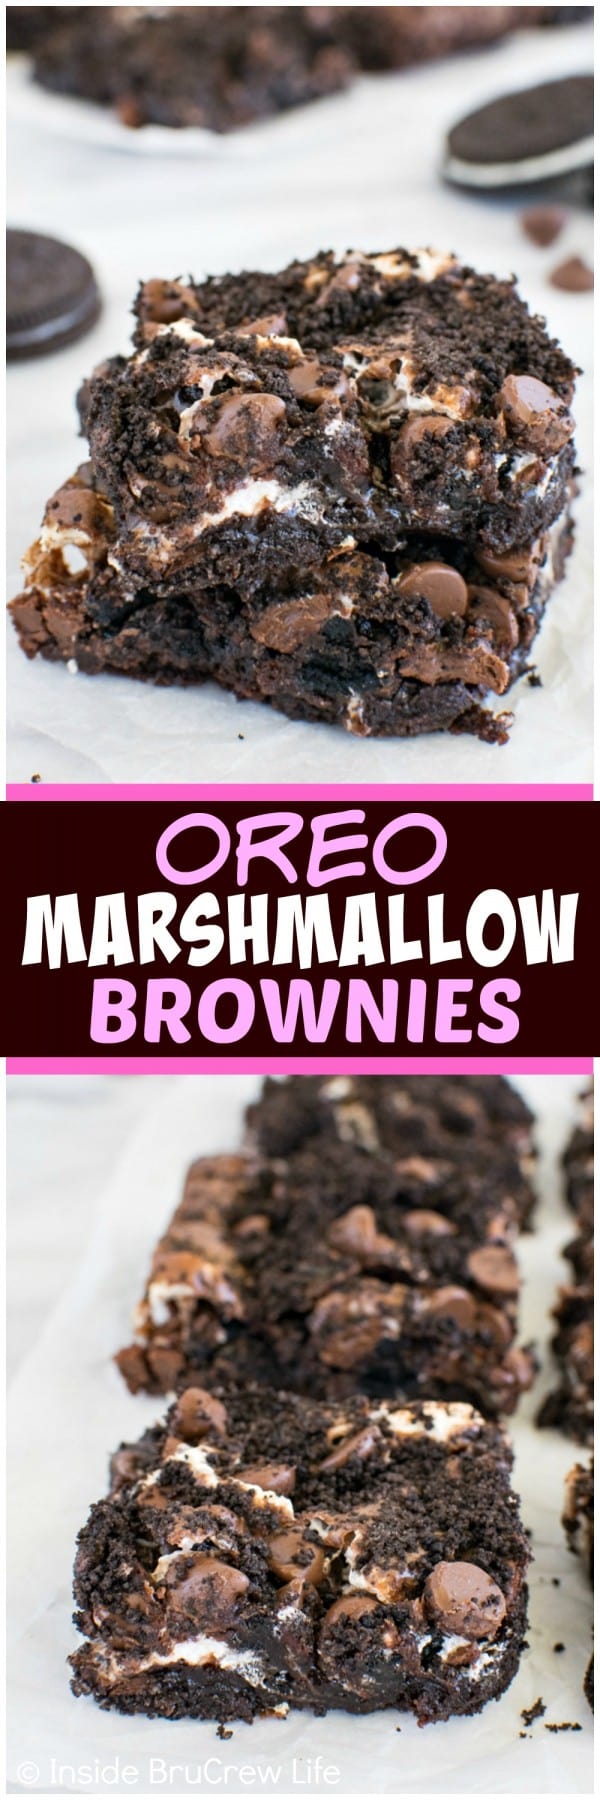 Oreo Marshmallow Brownies - swirls of cookies and marshmallows add a sweet twist to these brownies. Awesome dessert recipe!